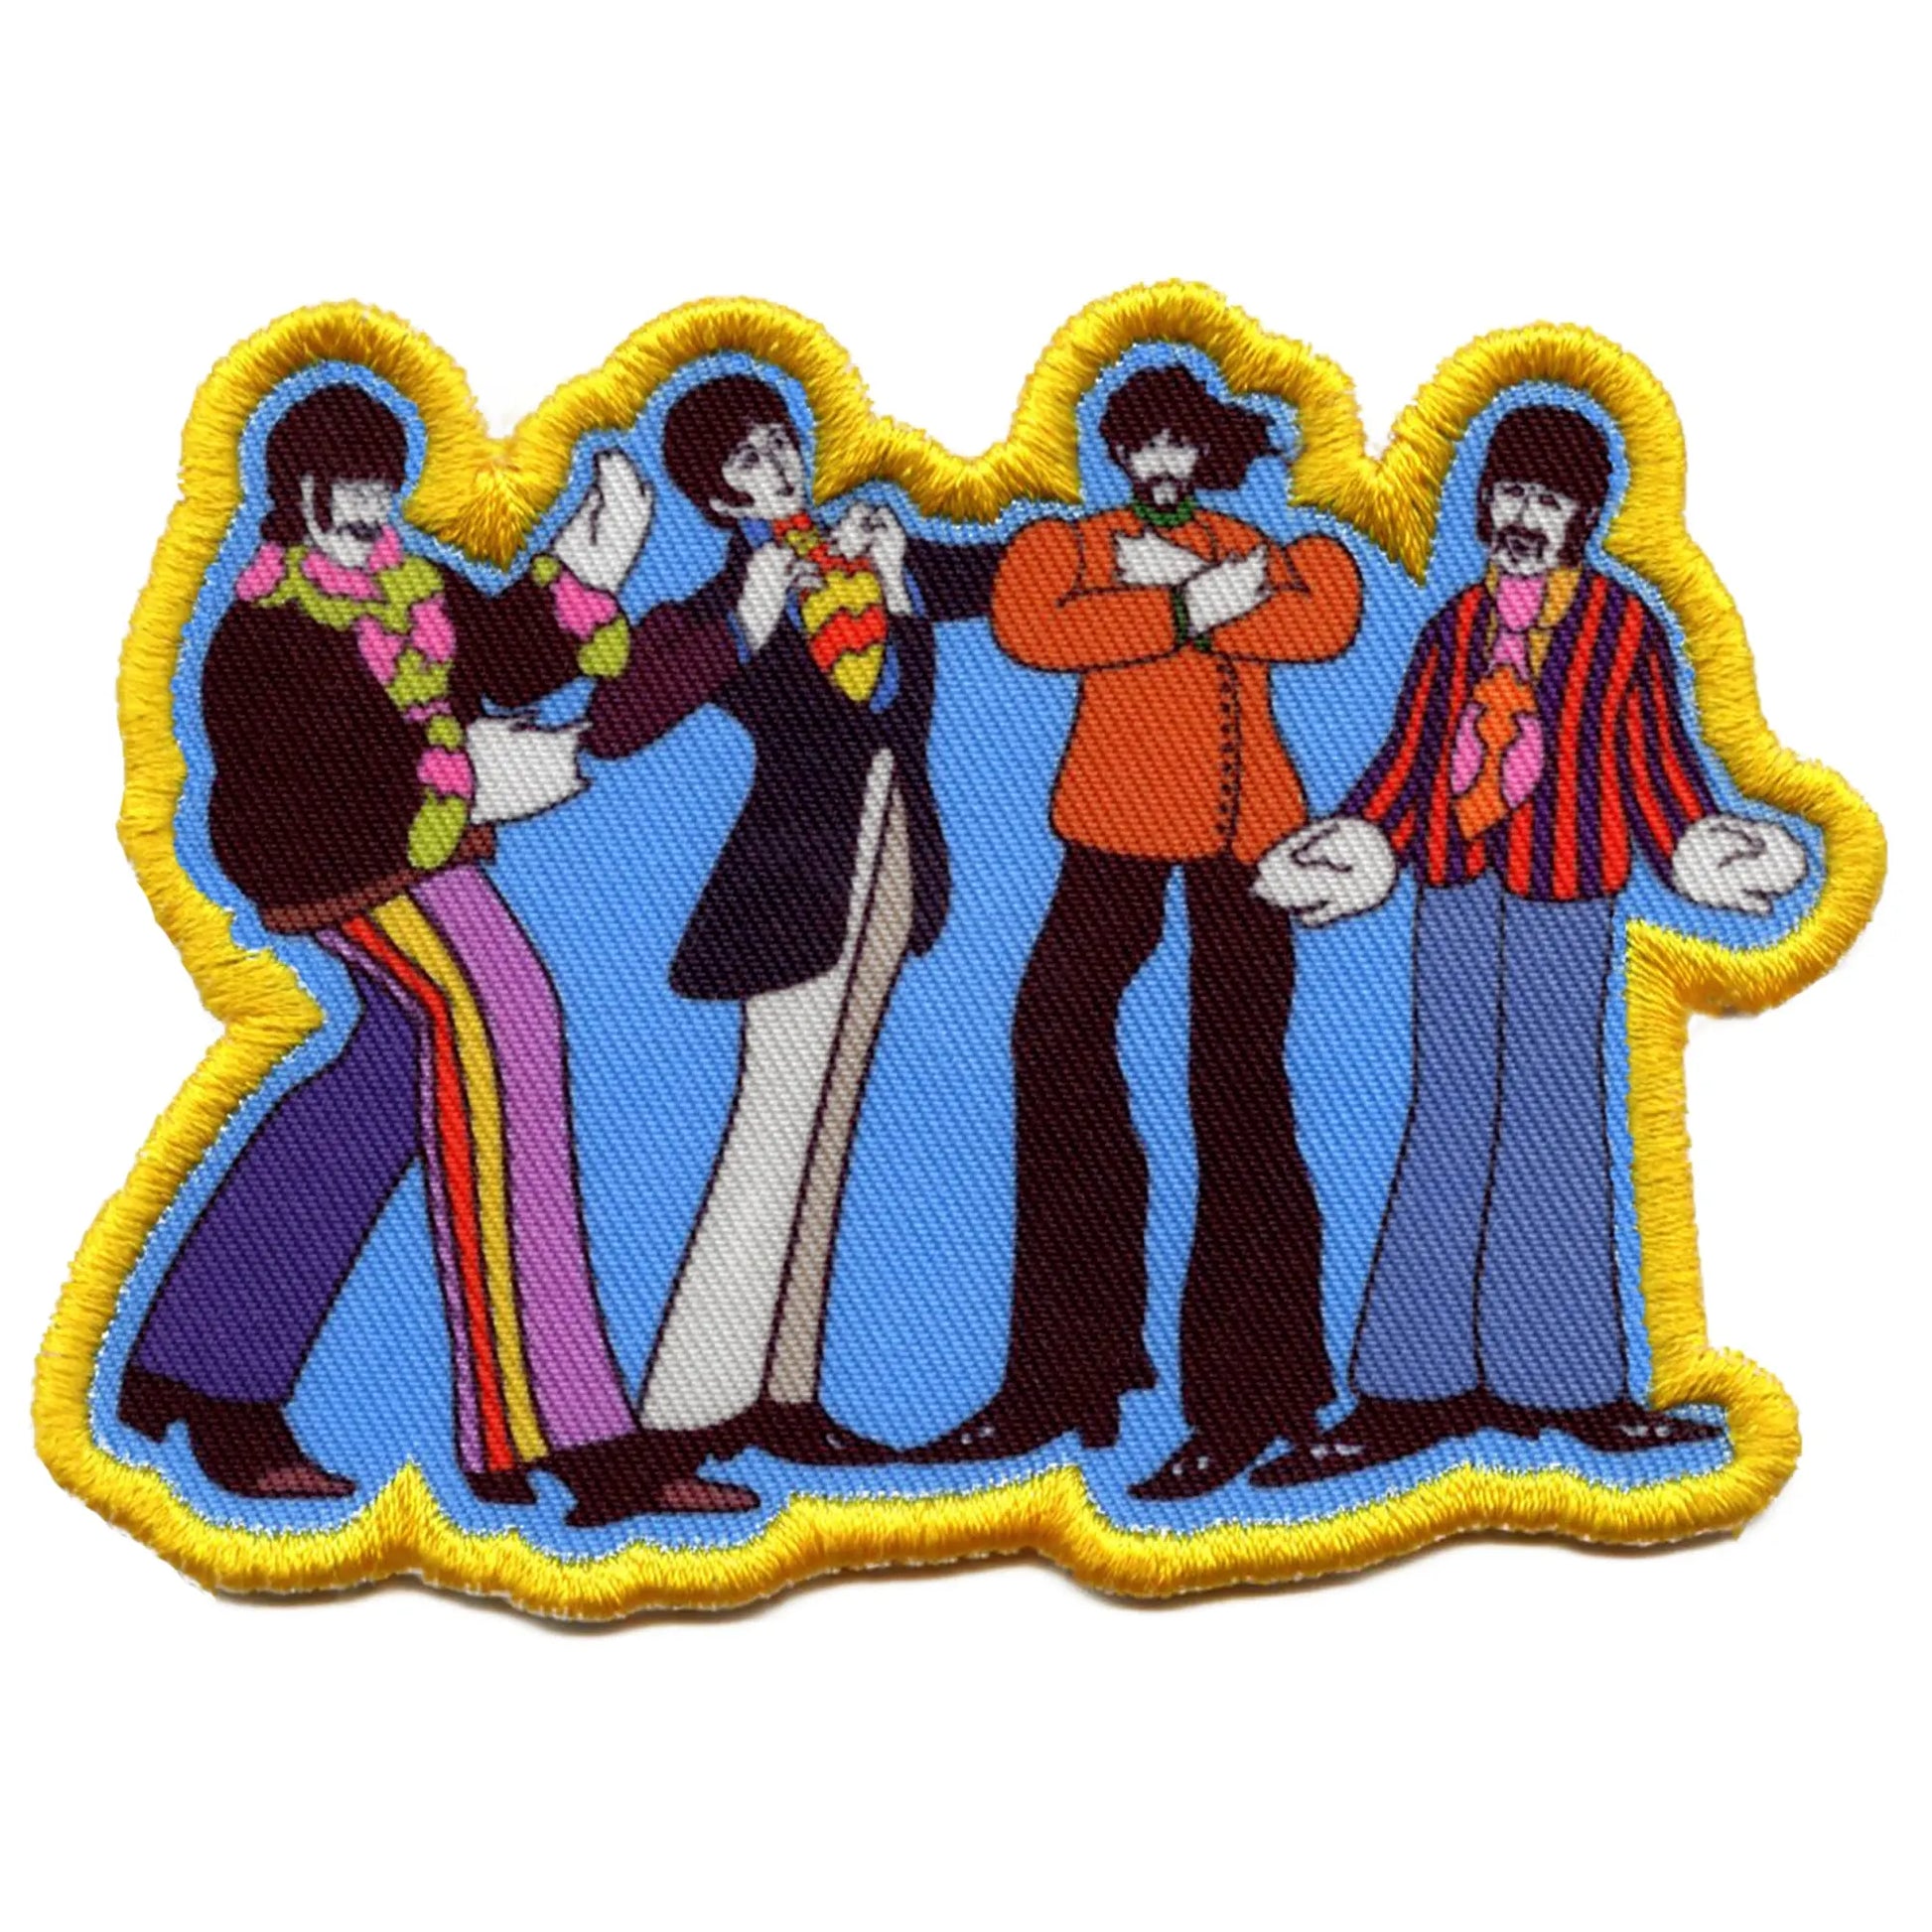 The Beatles Yellow Submarine Sub Band Patch British Rock Band Woven Iron On